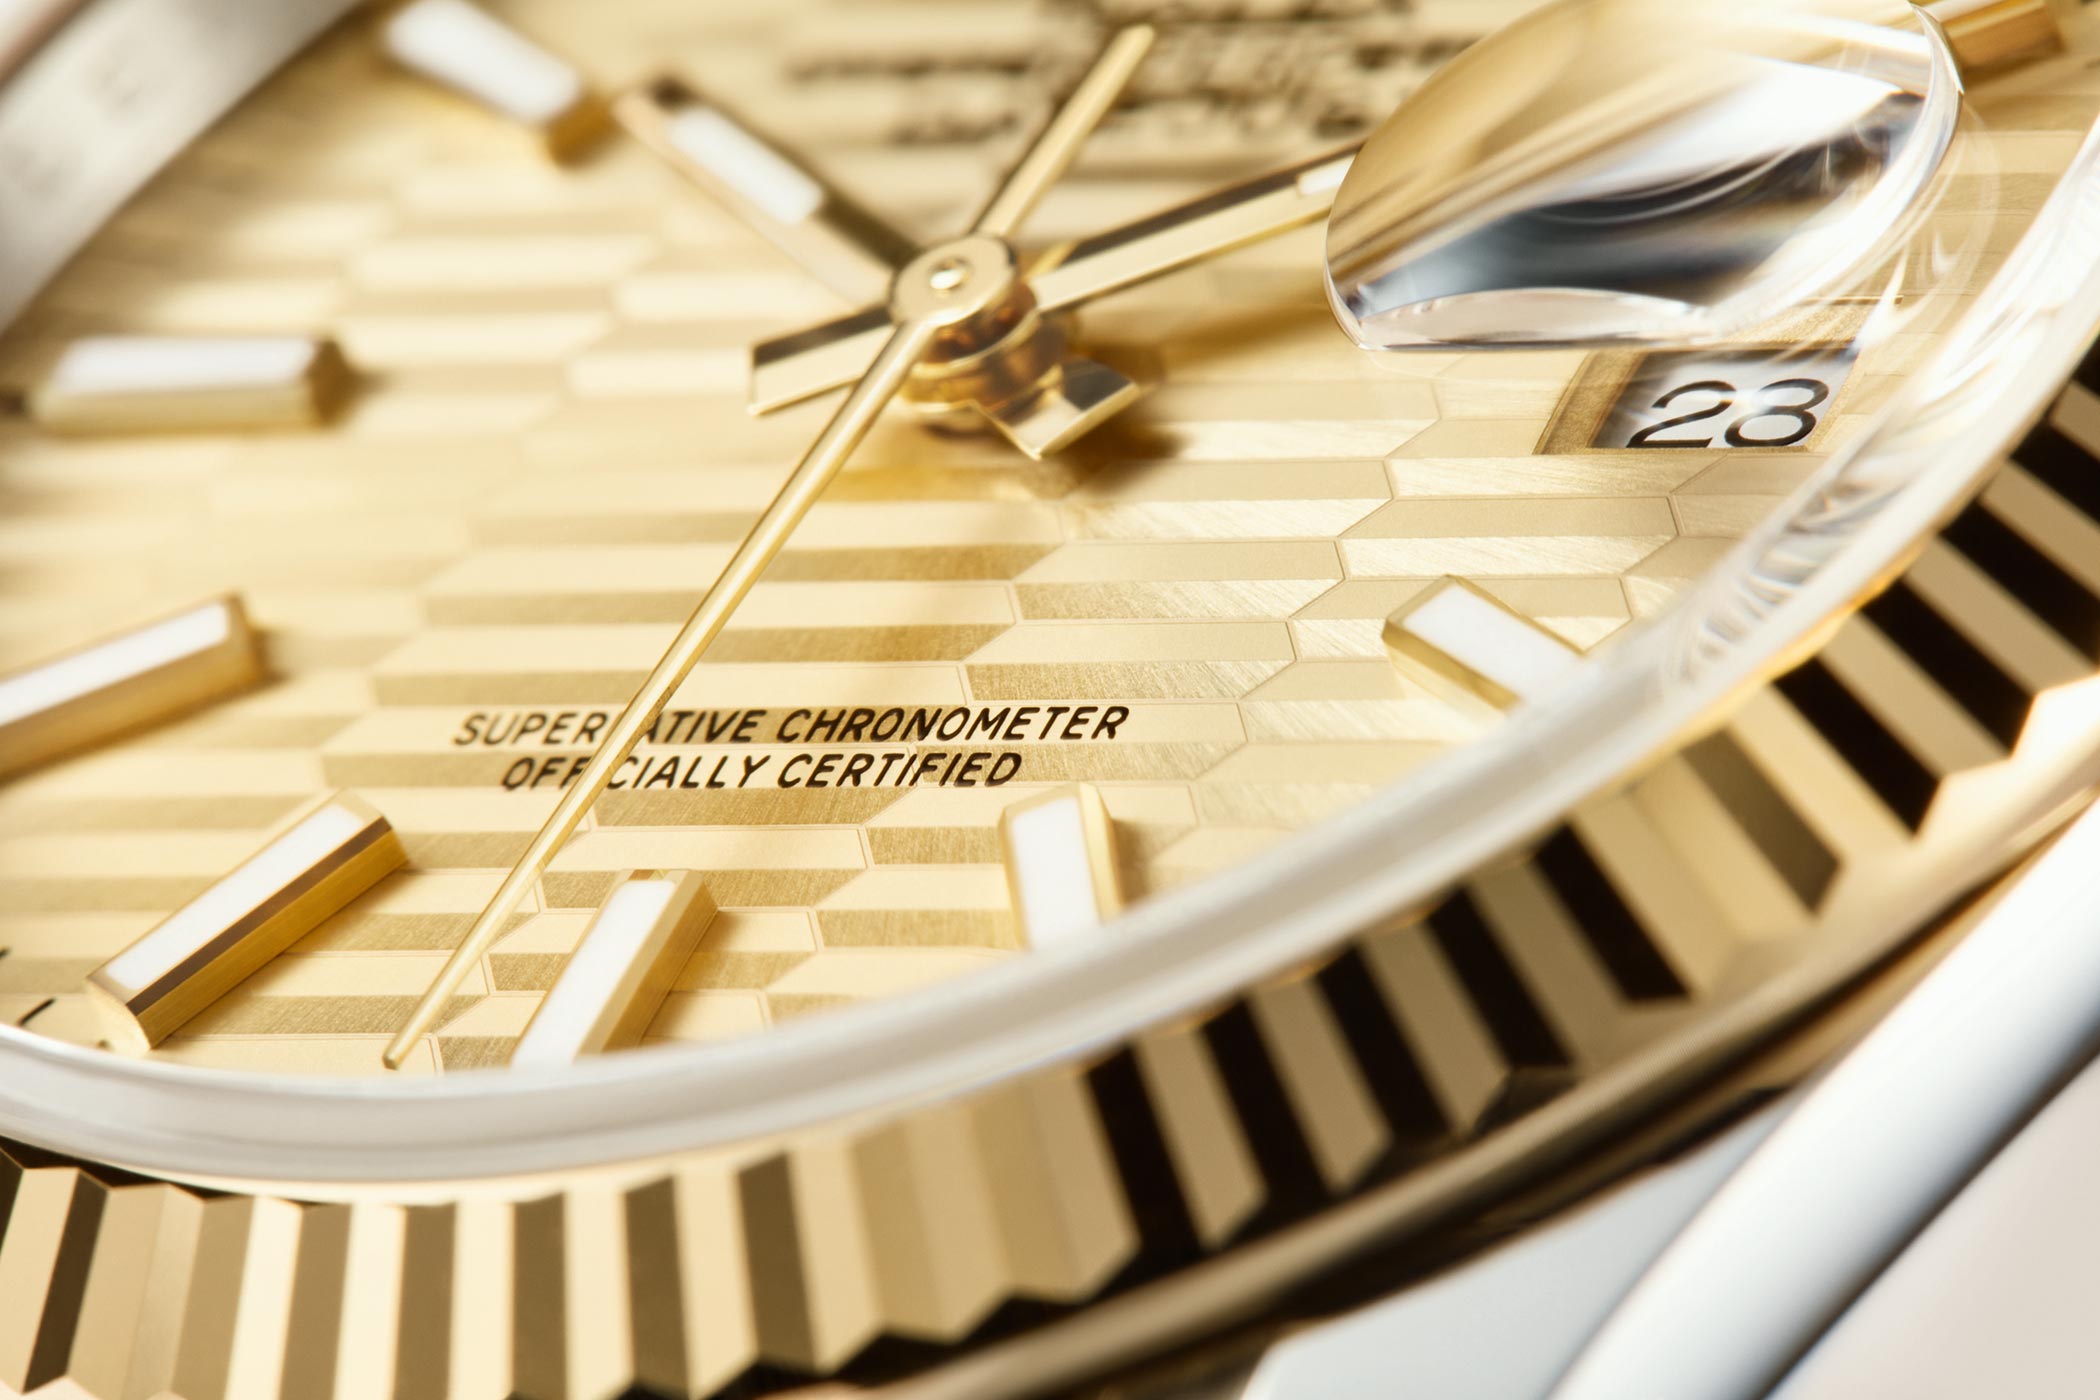 Rolex Datejust in Oystersteel and gold, M126233-0039